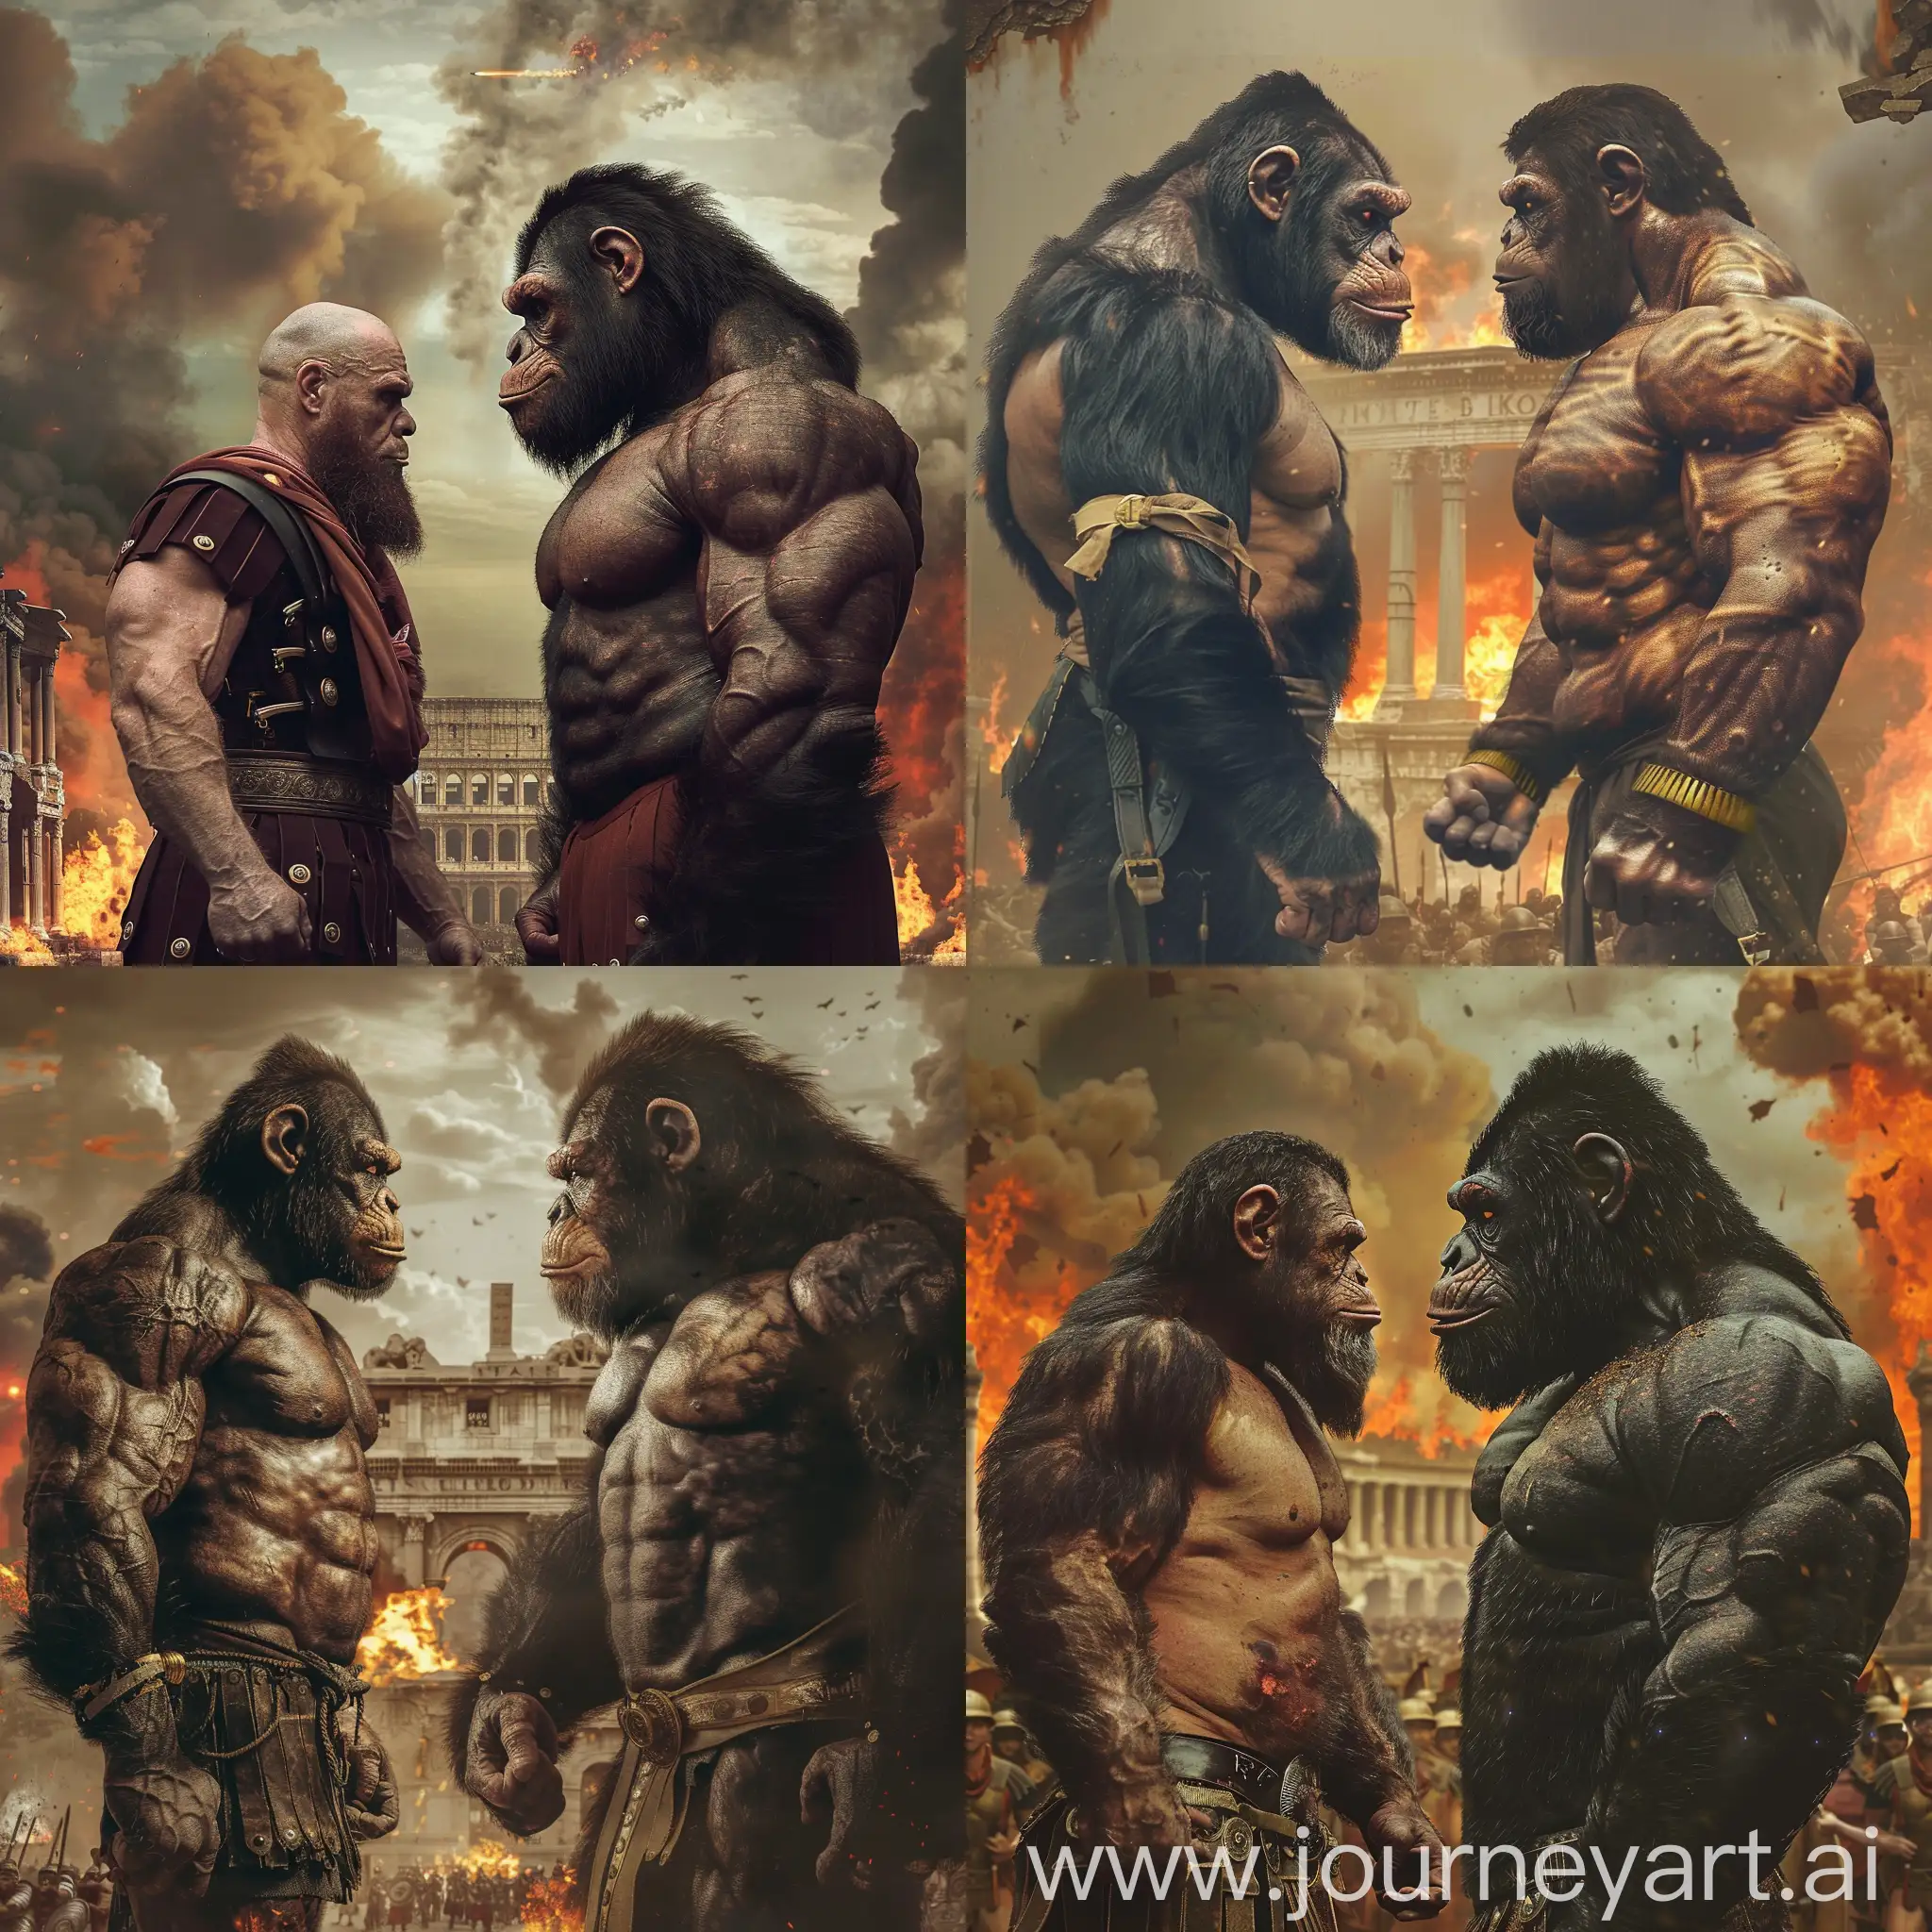 the planet of the apes, François Legault, side view, full body, scruffy unshaven 3-meters-over pumped-strongman in ancient rome's army suit, big porpotions biceps , unshaven , 8-foot-tall-ape natural skin, internatinal-hunky-bodybuilder mix size chilling with his very-giant-sized-bodybuilder-male, enormous swollen enlarged 600-inches-biceps, long humongous arms, oversized thick triceps, enormous forearms, gigantic traps, massive back muscles oversized bulging shoulders, with the Rome fire burning war as the background